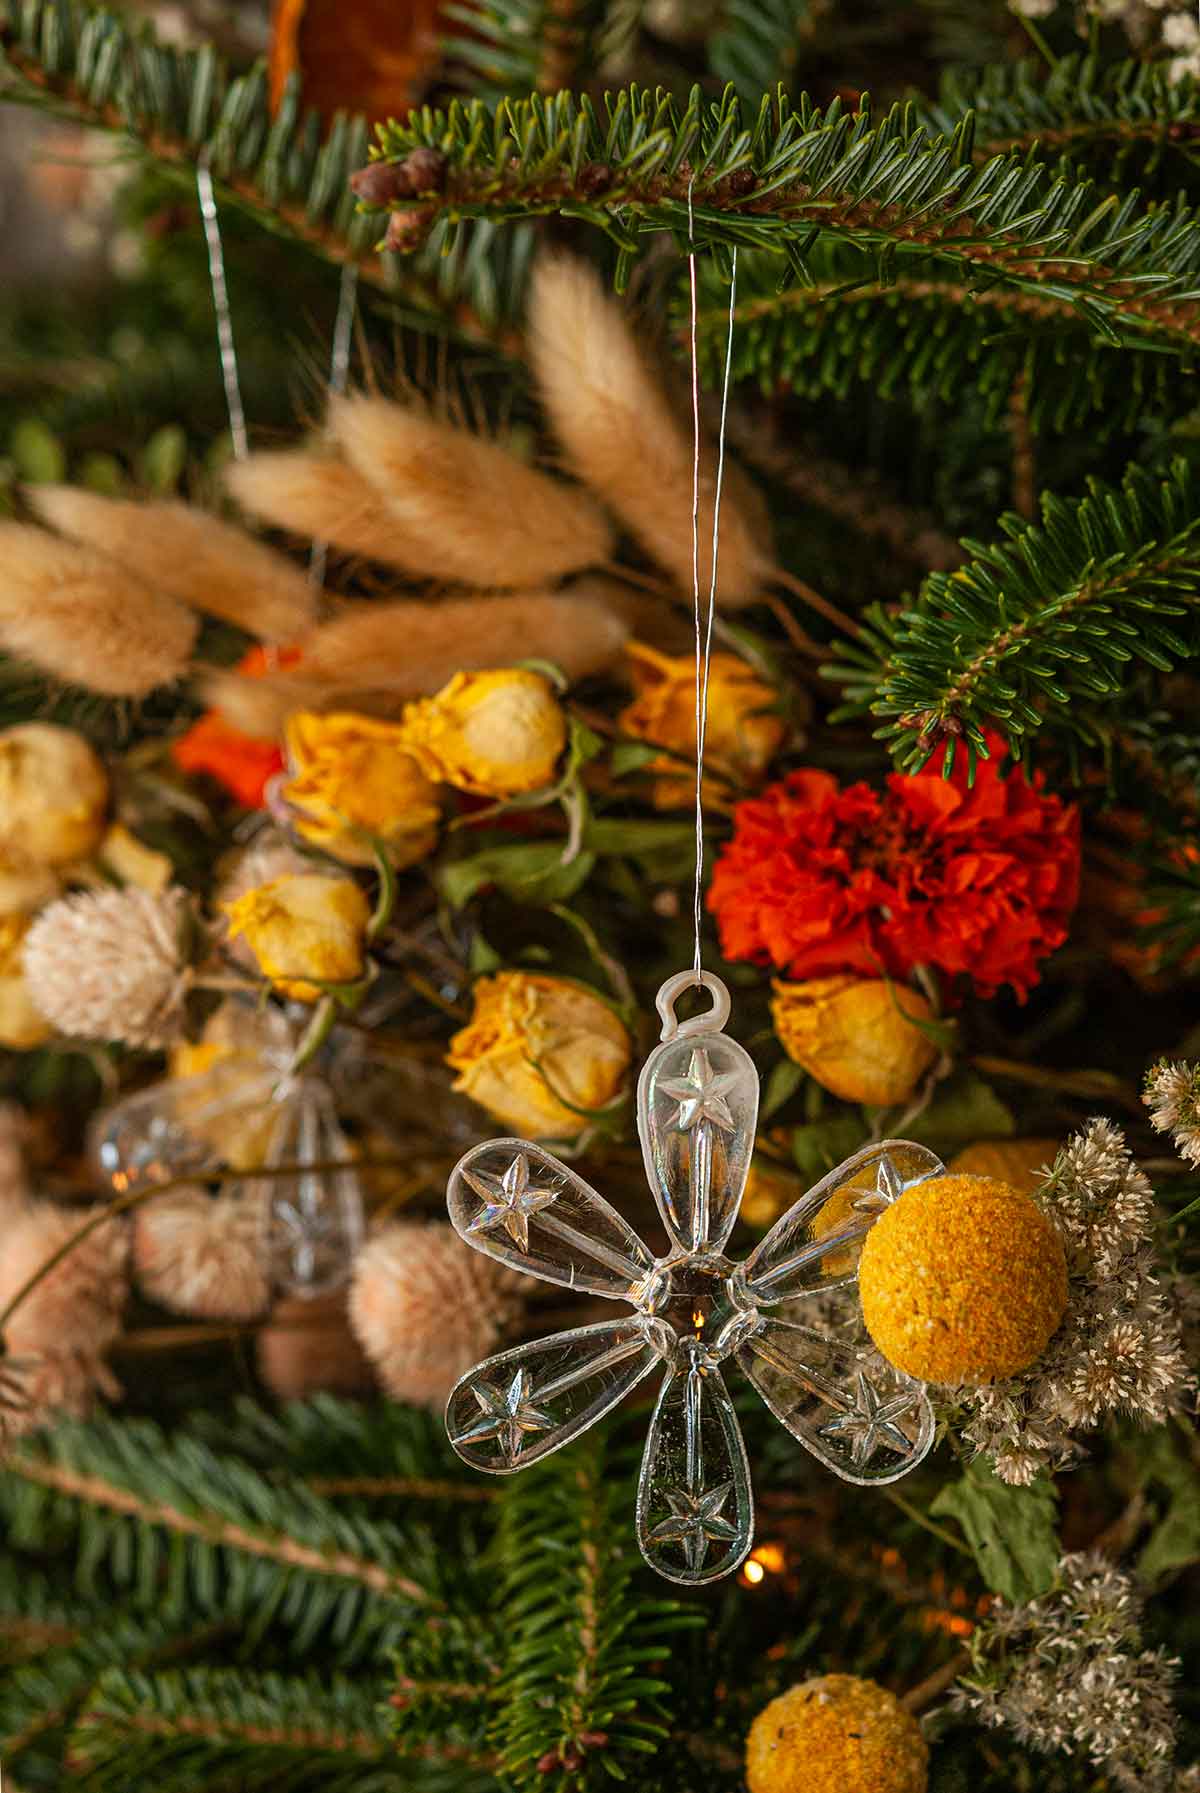 A glass snowflake ornament in front of flowers on a Christmas tree.